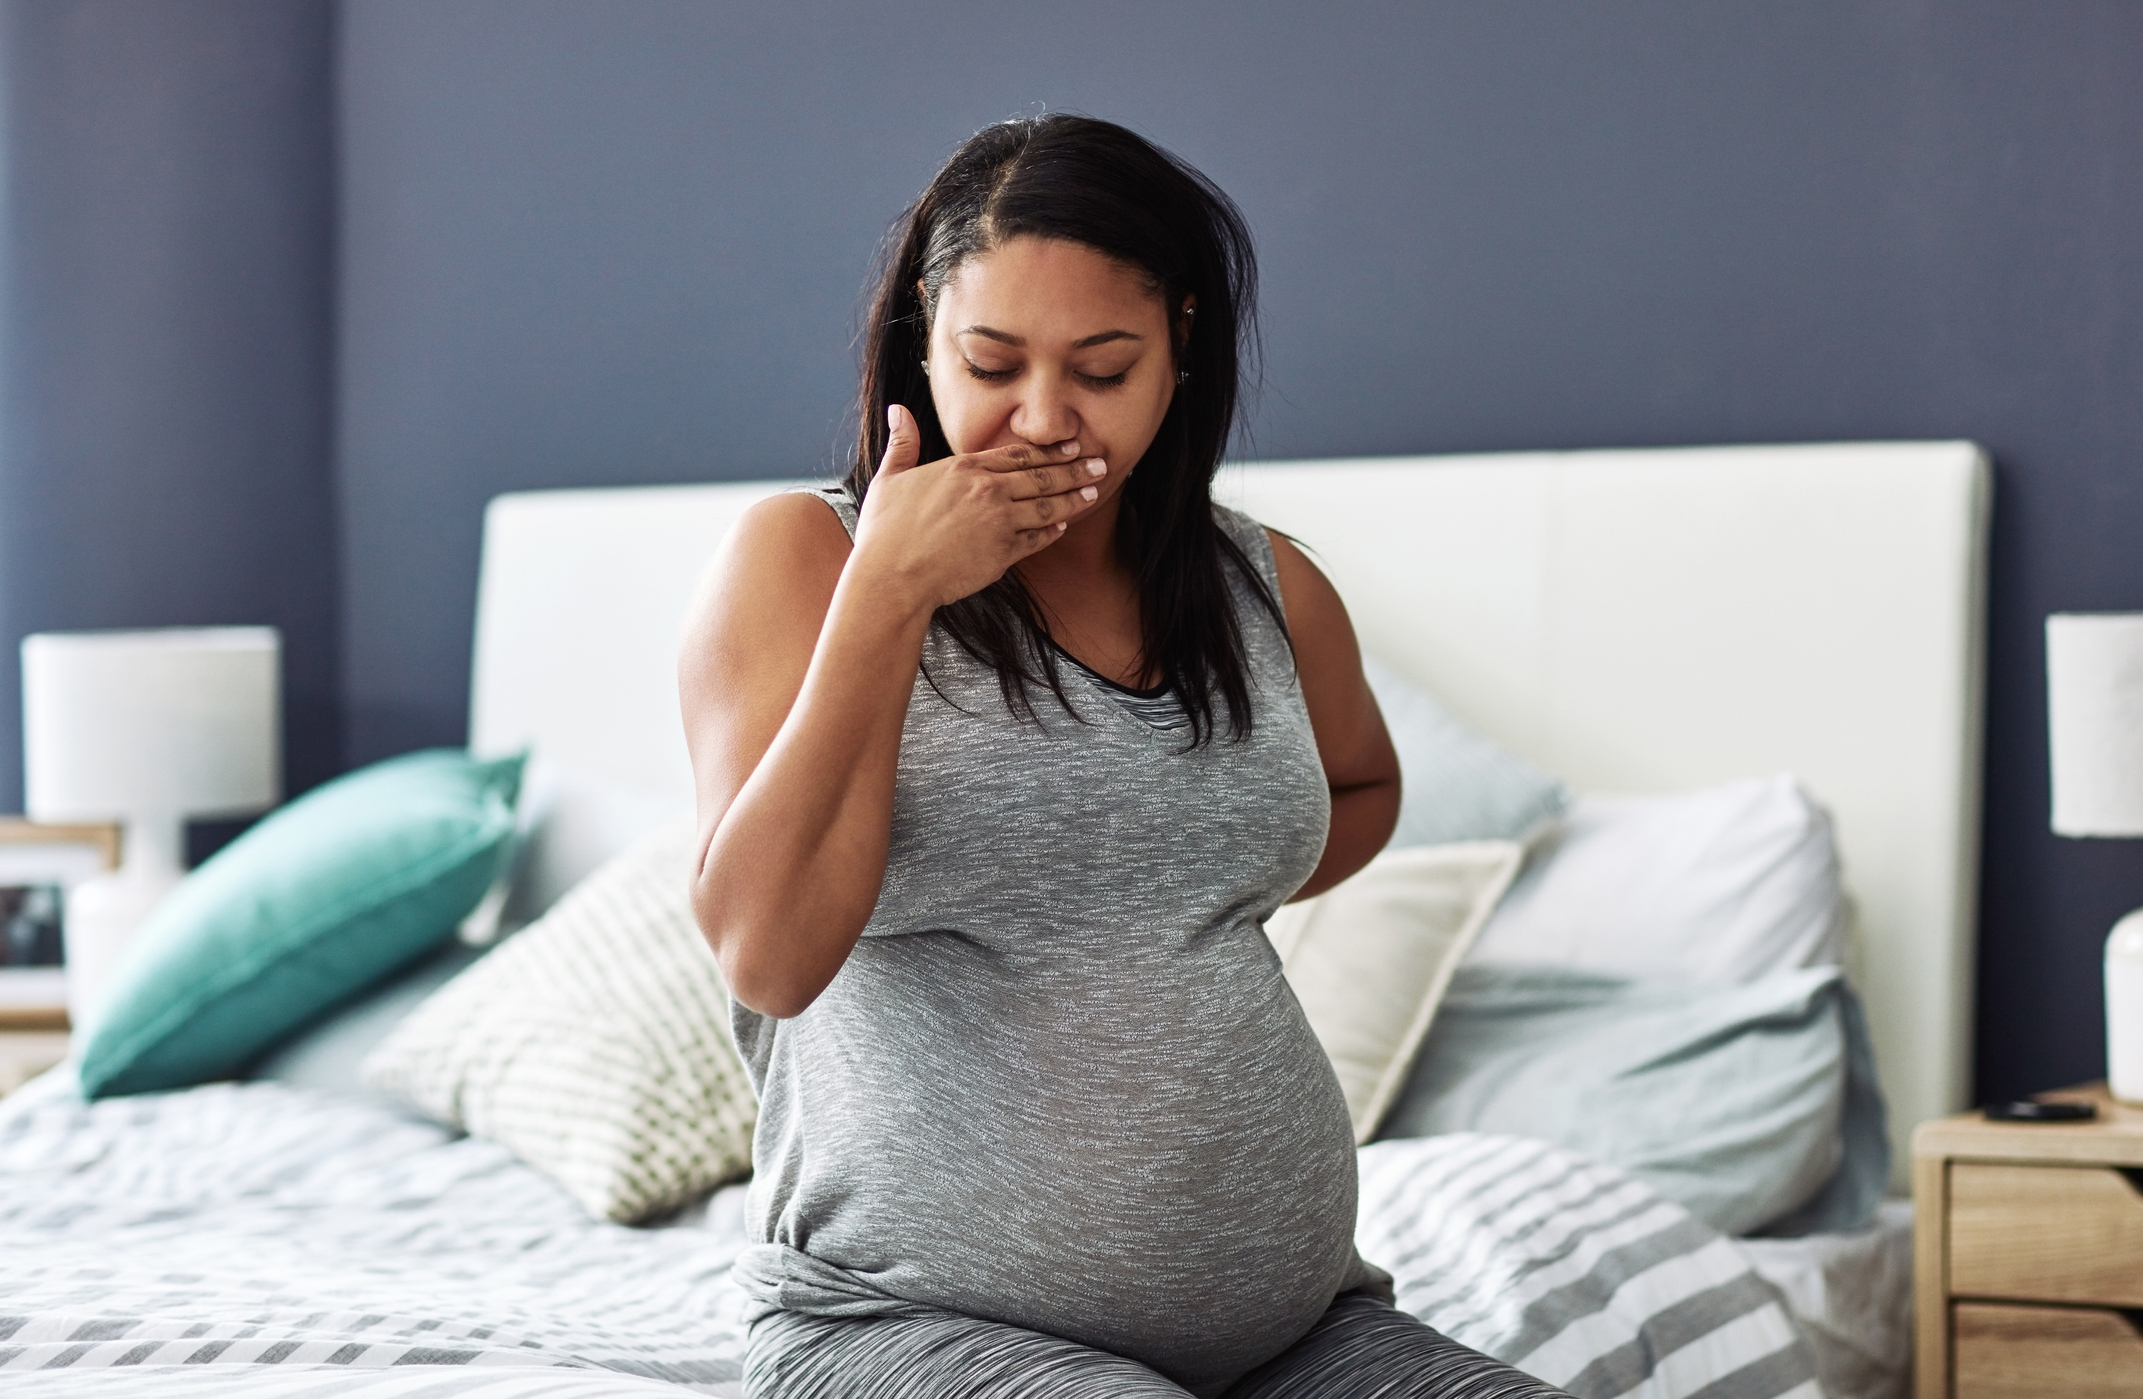 A pregnant woman sits on the edge of her bed feeling sick